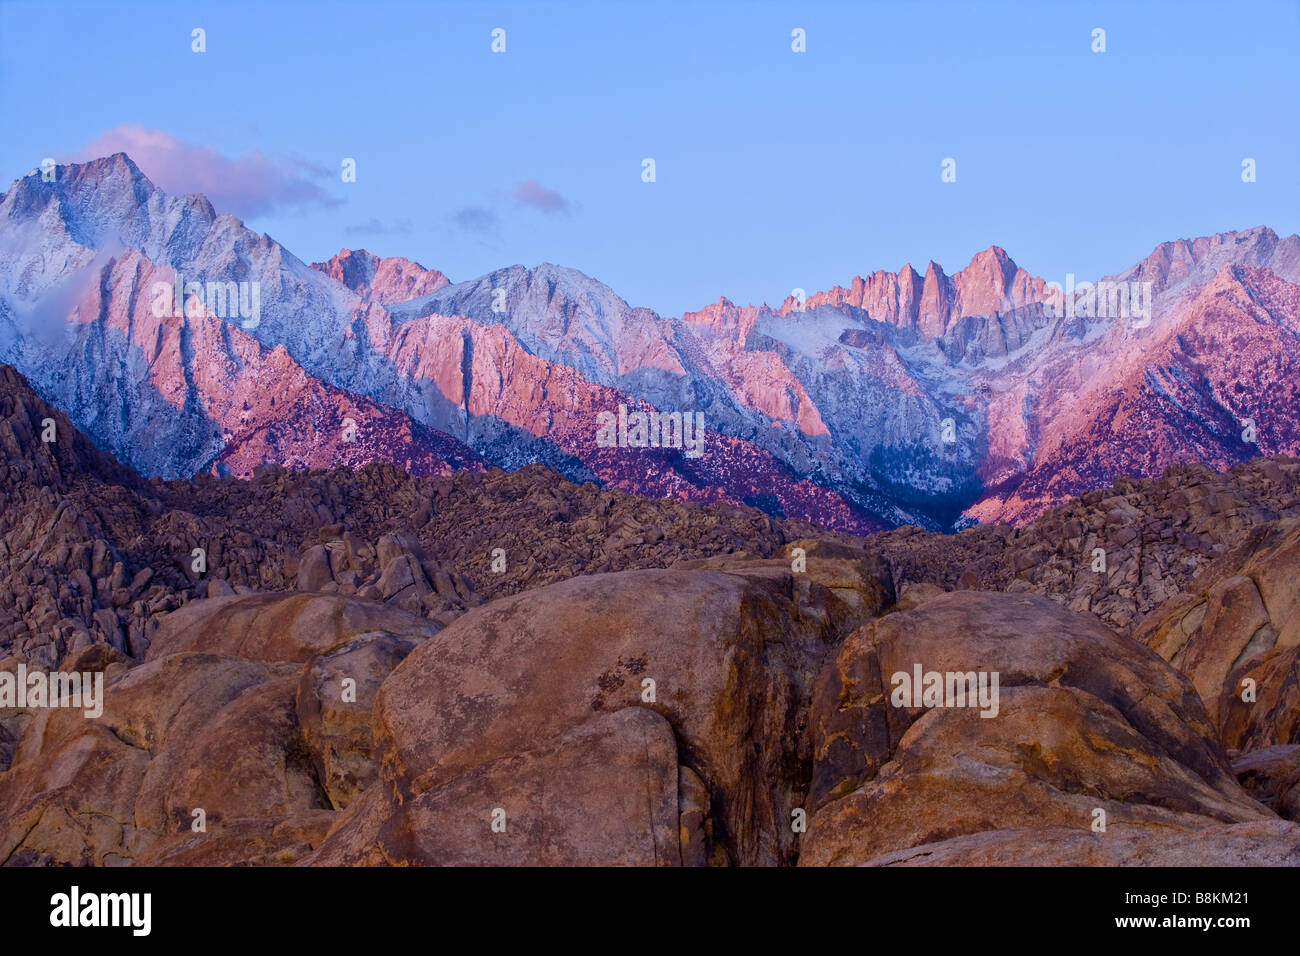 Mt Whitney Lone Pine Peak and the Alabama Hills at dawn after an autumn snow storm Sierra Nevada Mountains California Stock Photo